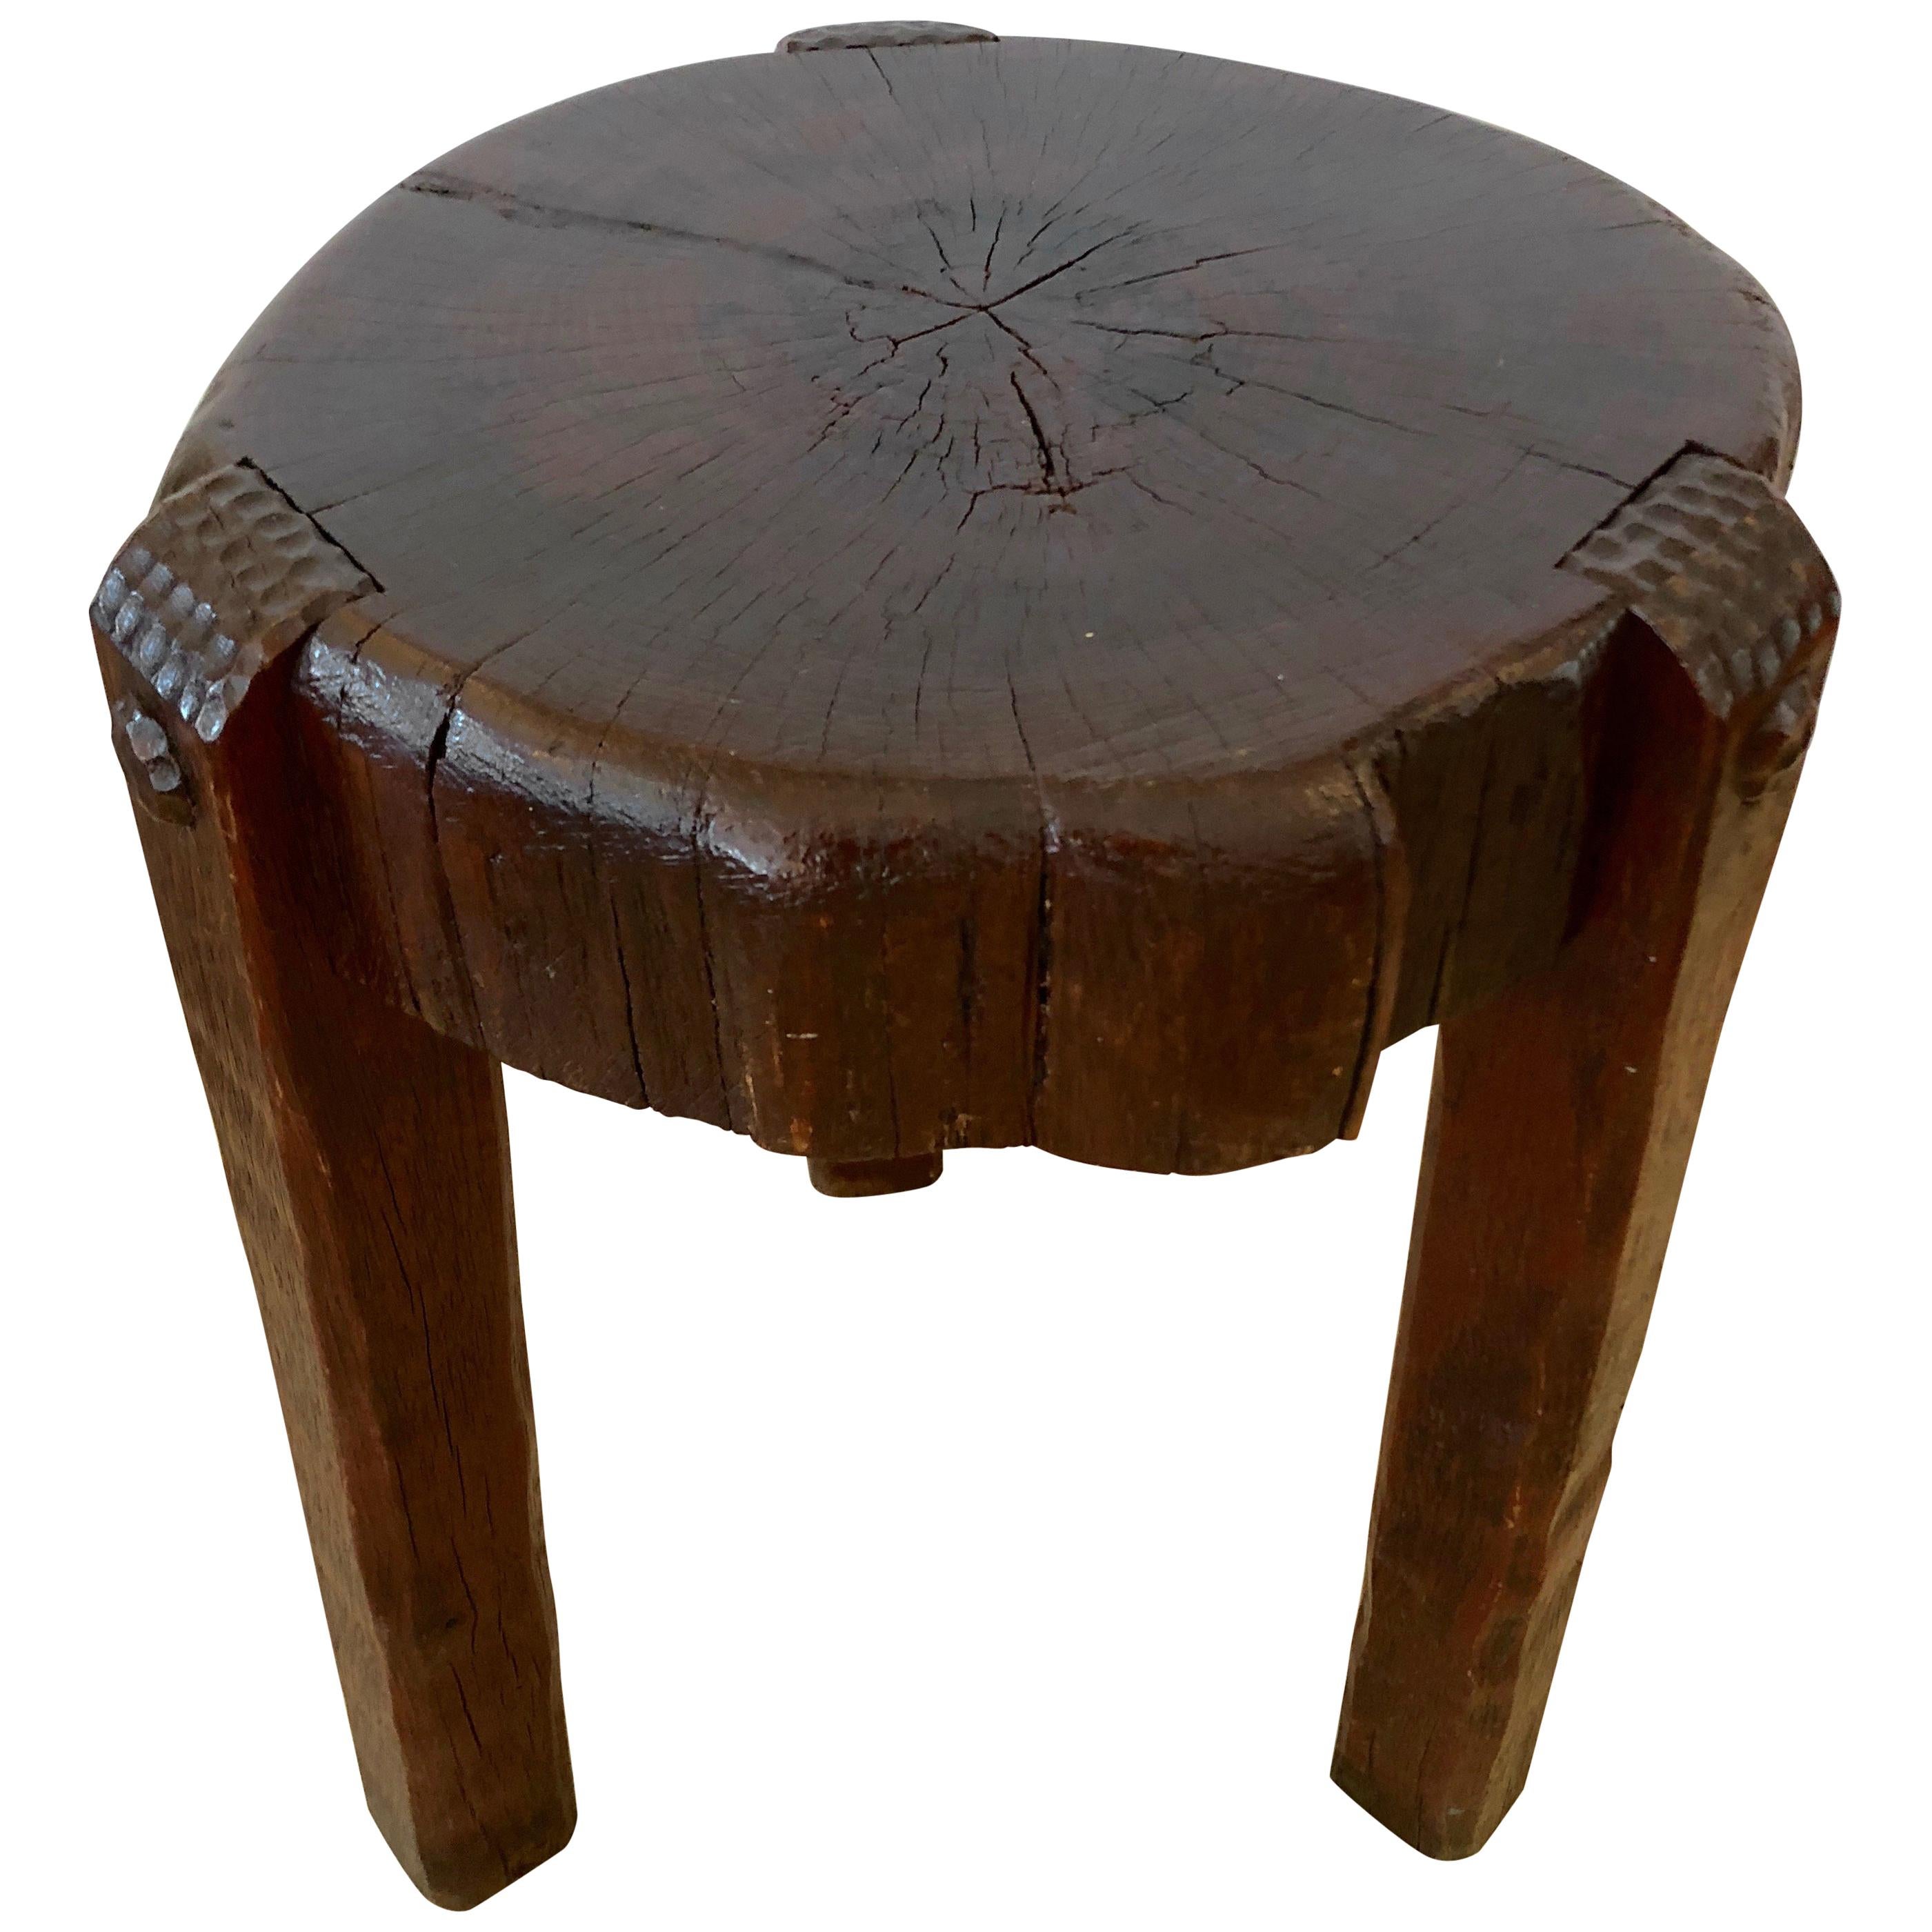 Wonderful Antique Arts & Crafts Rustic Slab Top Round Drinks Table End Table